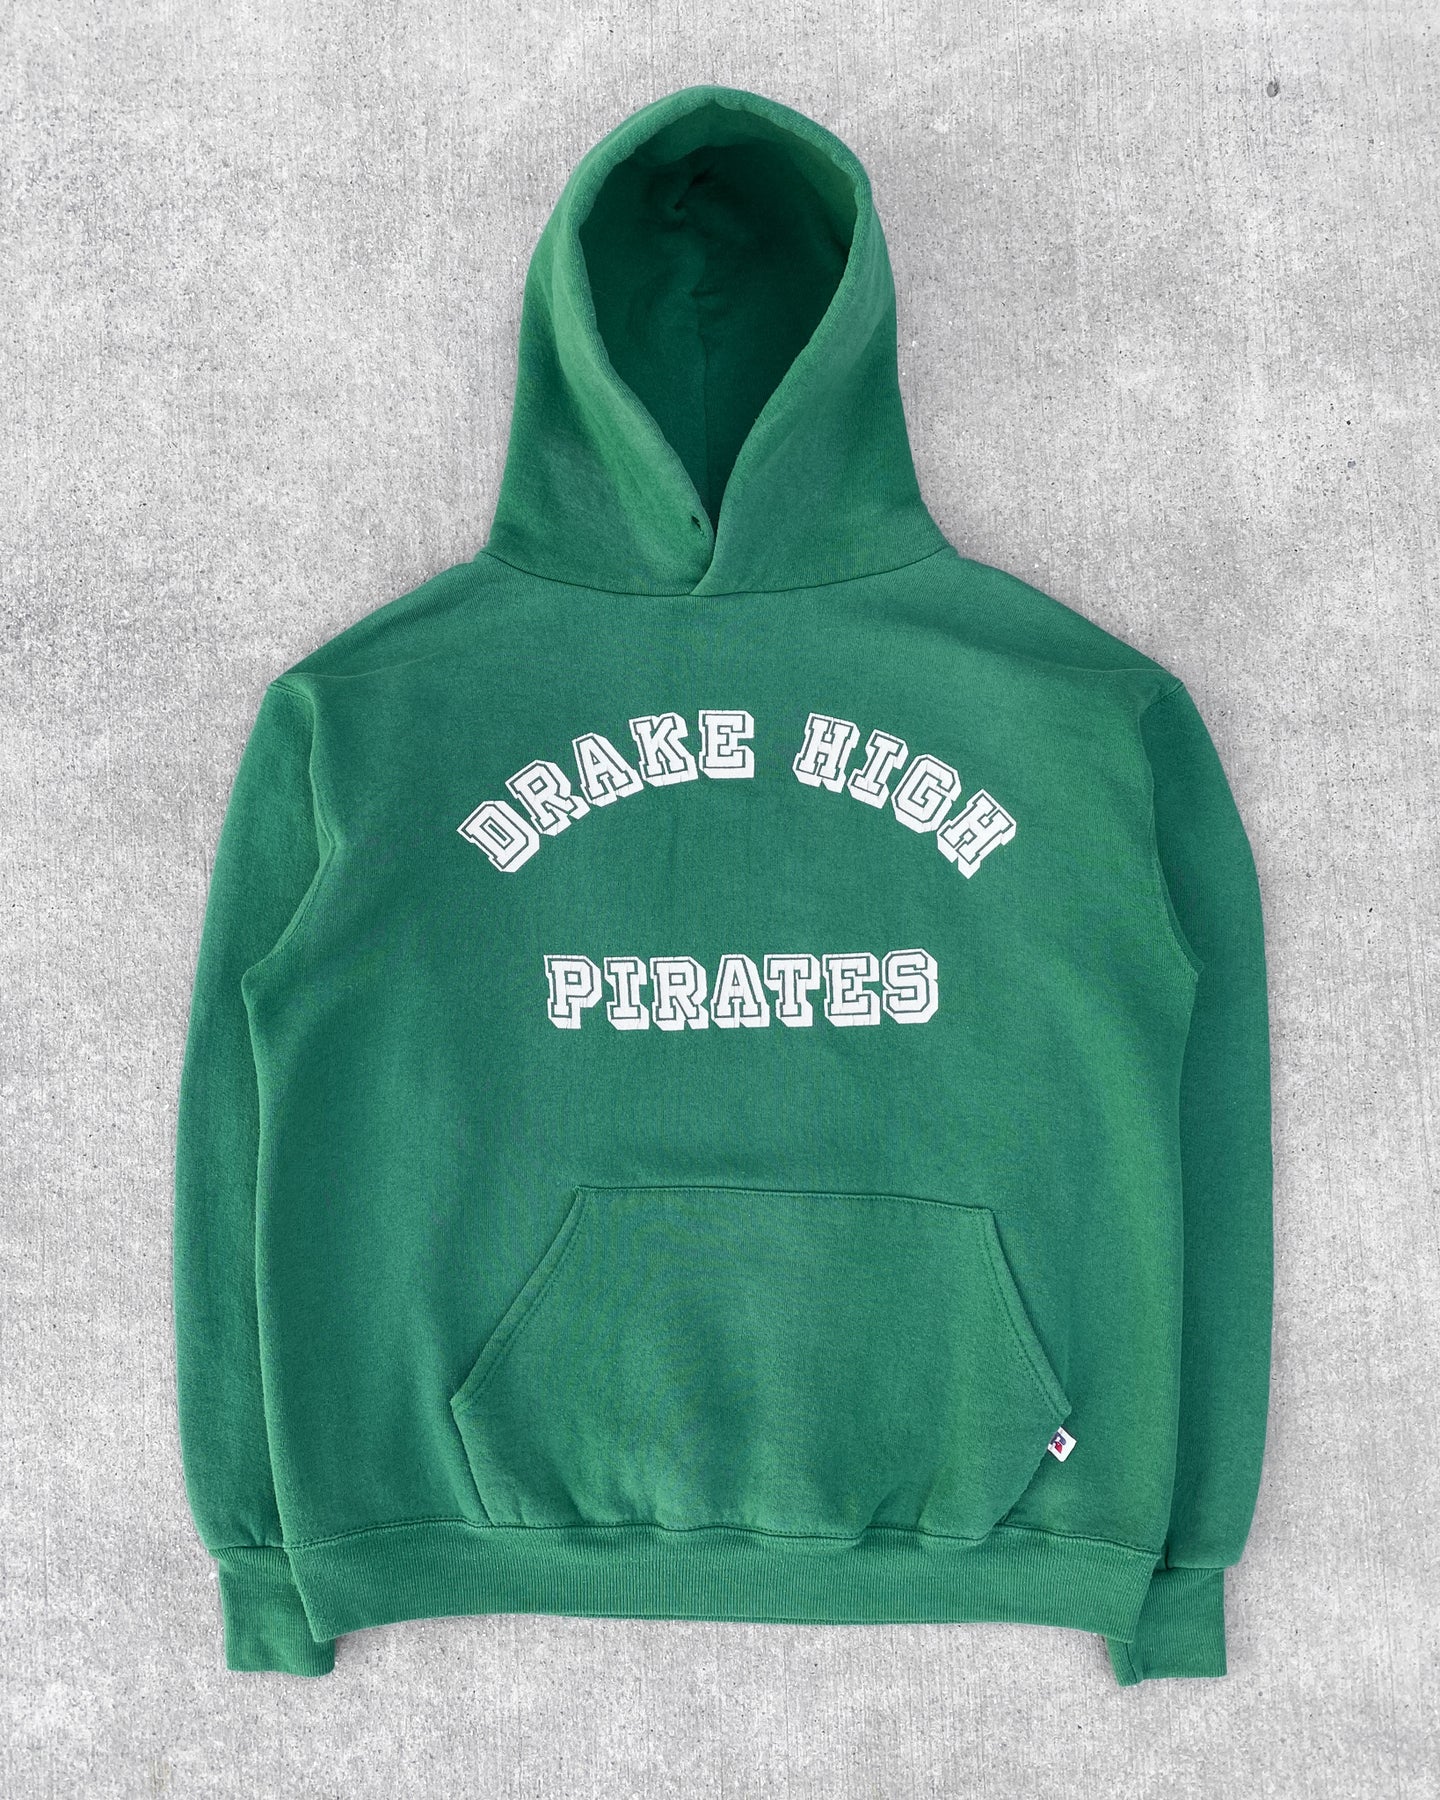 1980s Russell Athletic Drake High Hoodie - Size Large